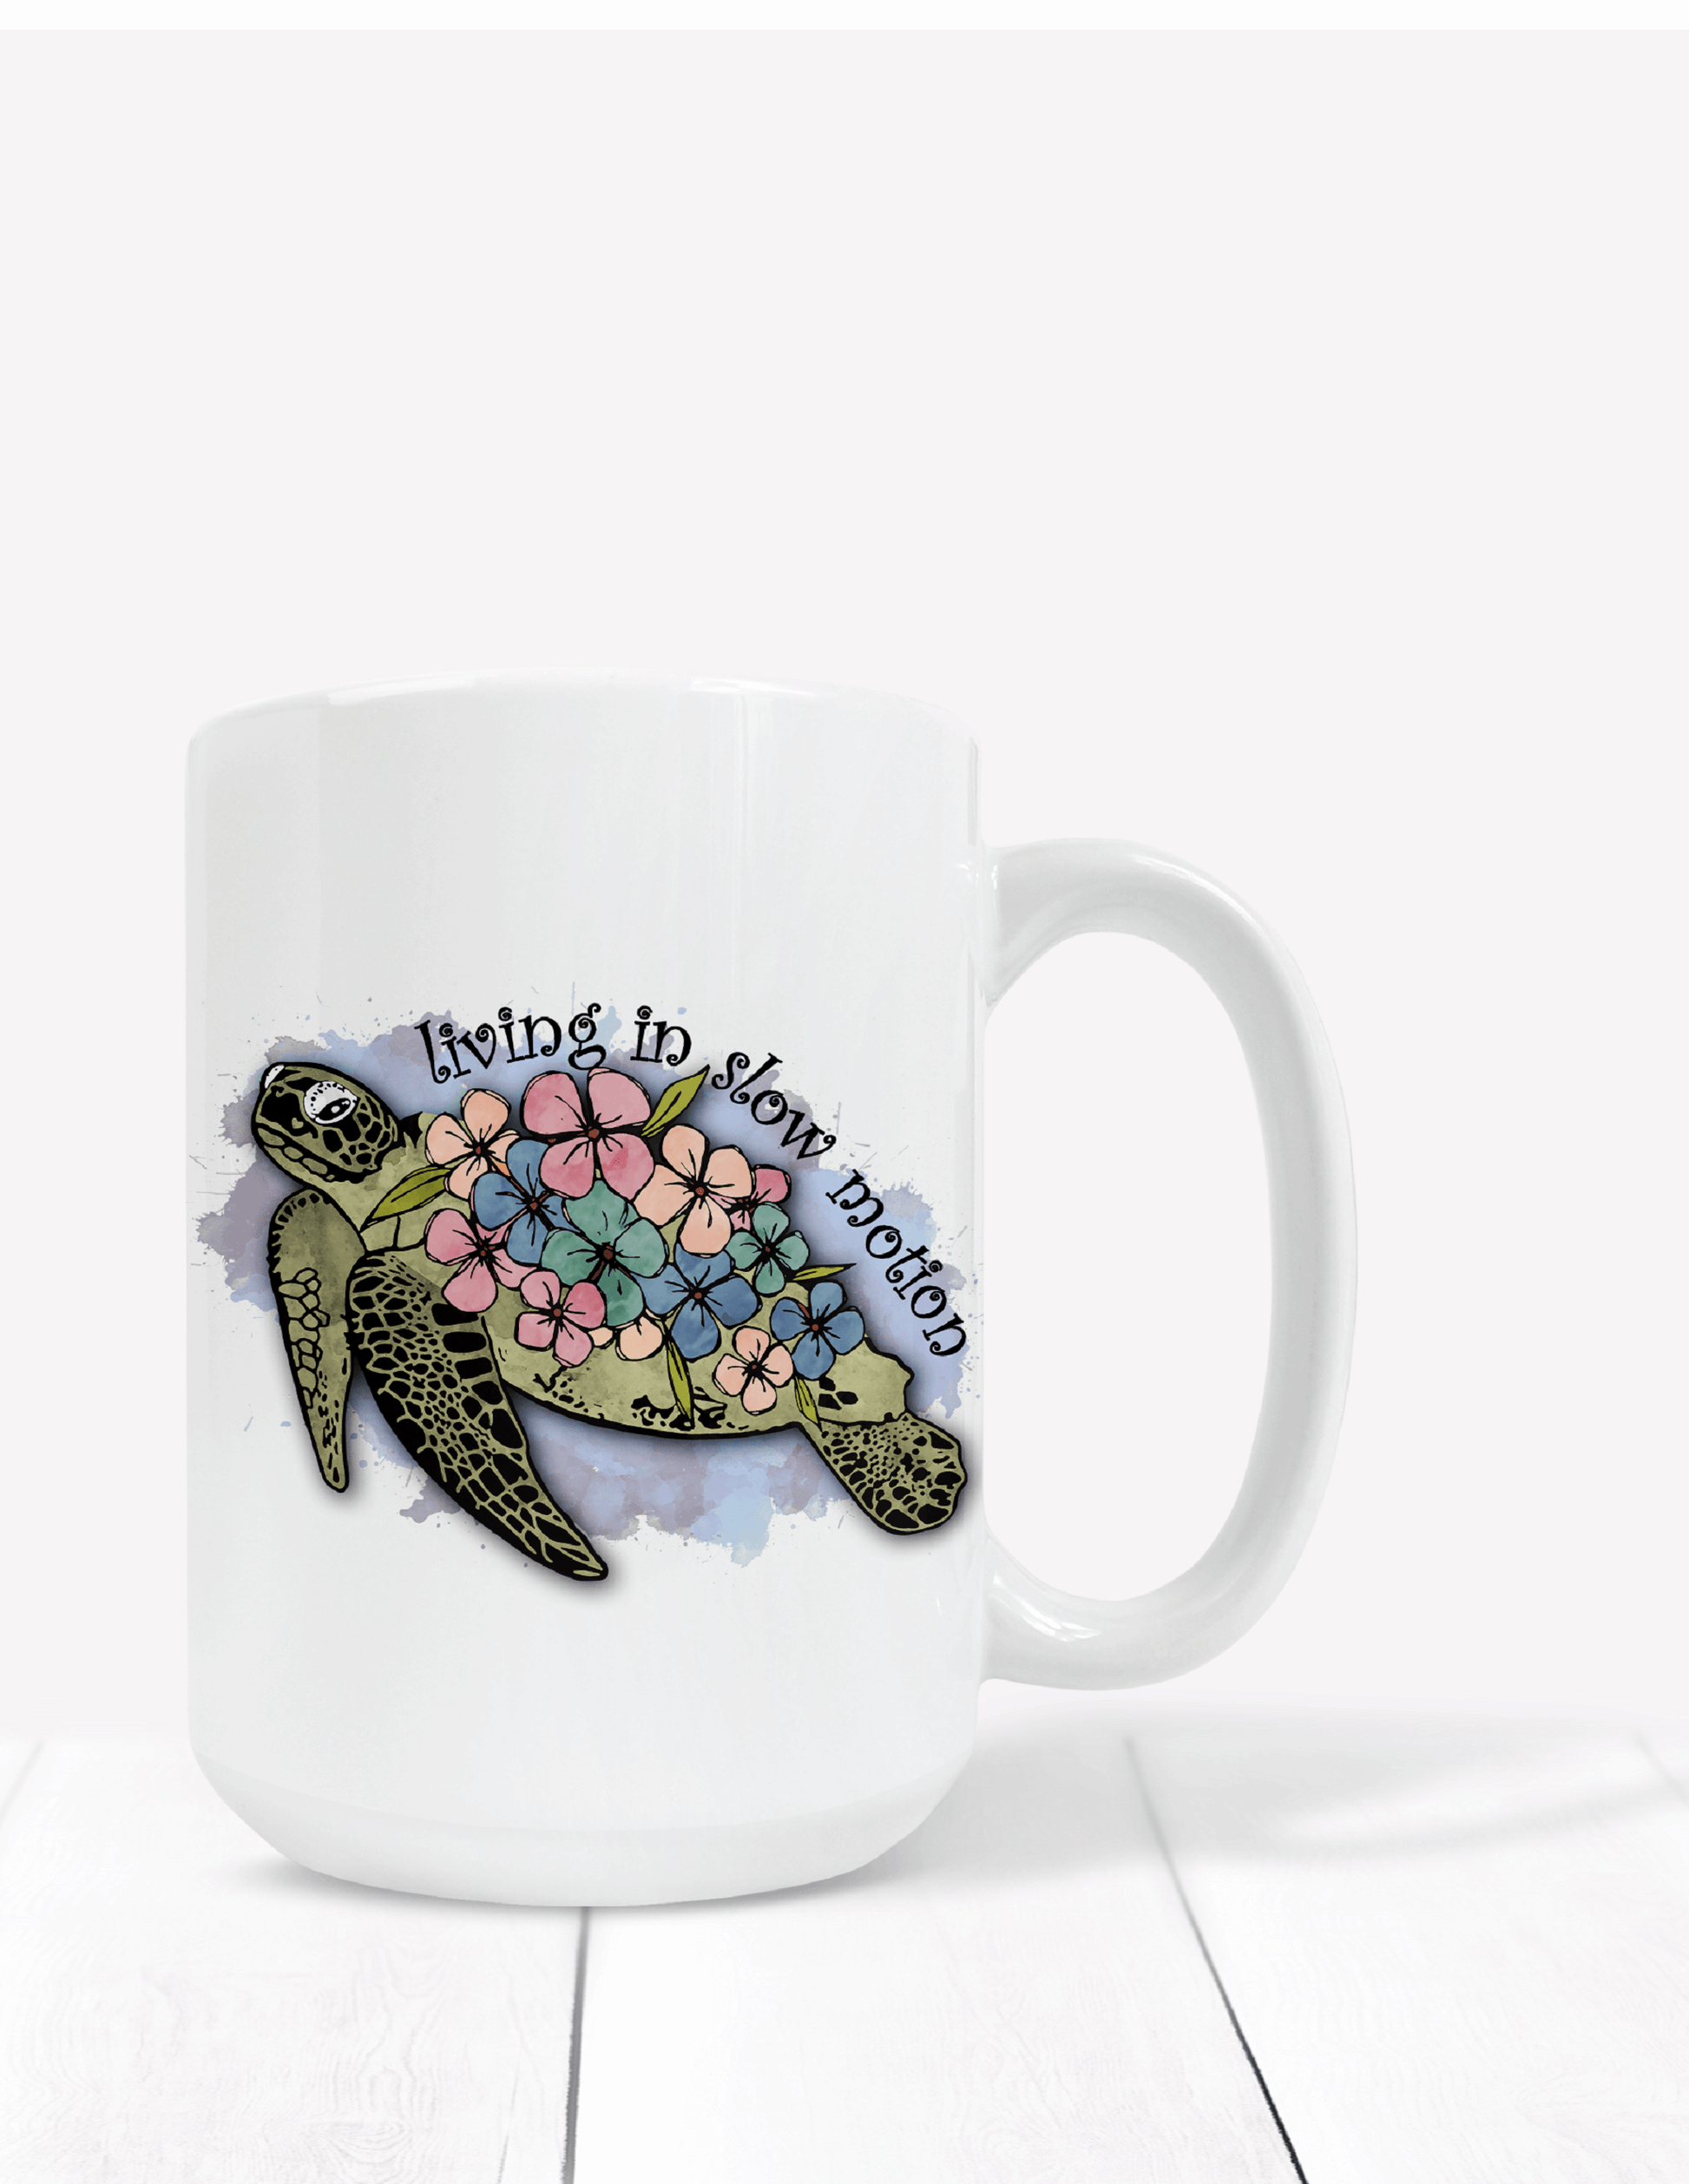  Living In Slow Motion Turtle Mug by Free Spirit Accessories sold by Free Spirit Accessories